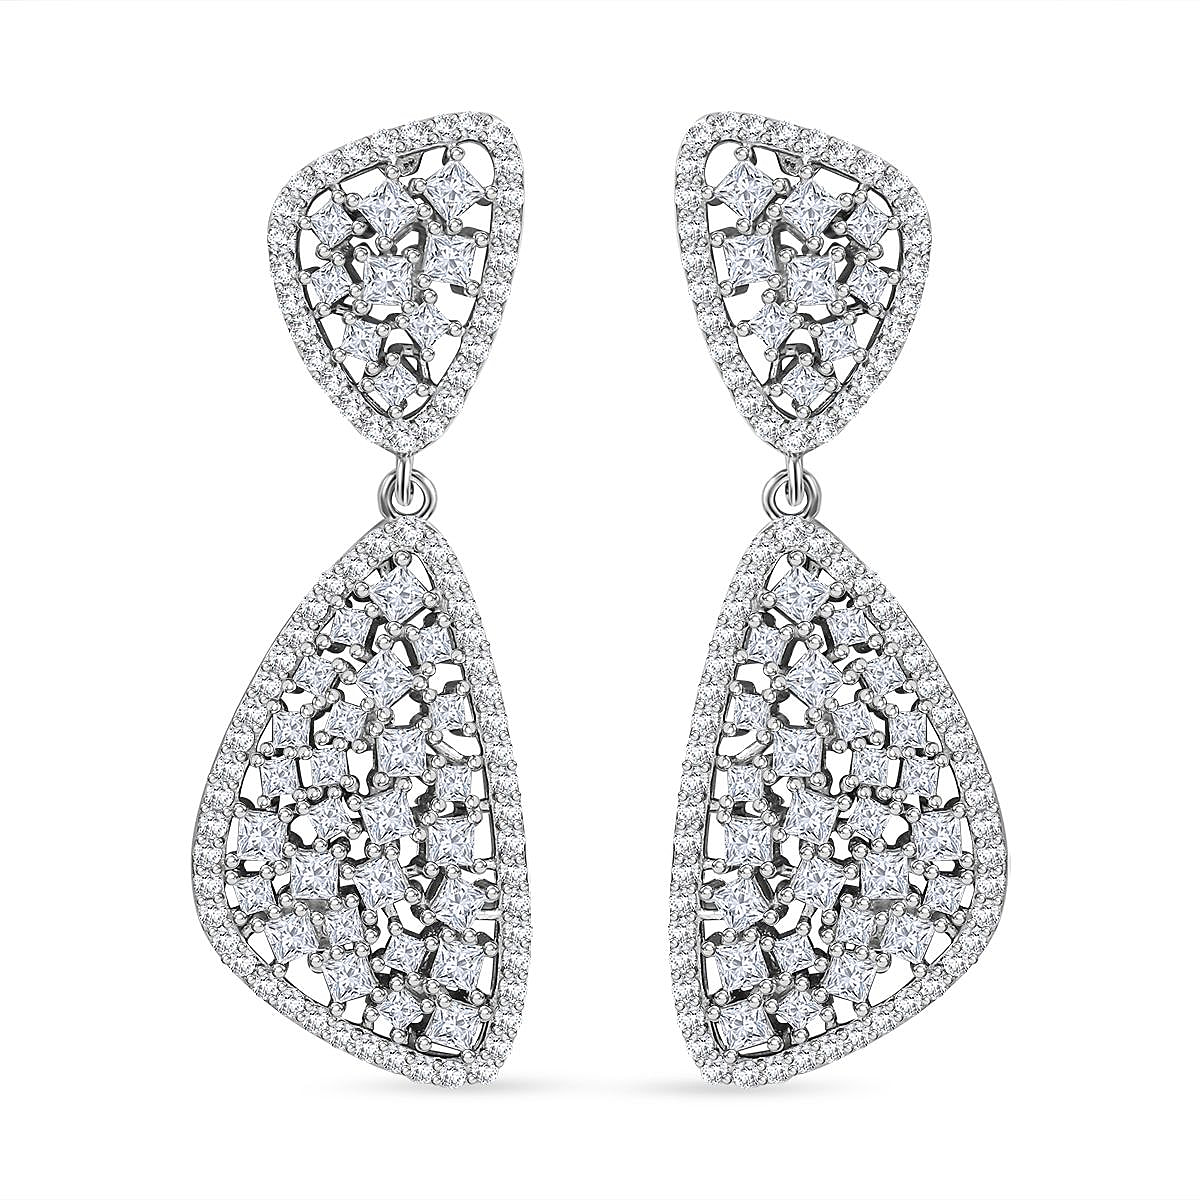 NY Closeout - Zirconia Dangle Earrings in Rhodium Overlay Sterling Silver, Silver Wt. 7.00 Gms